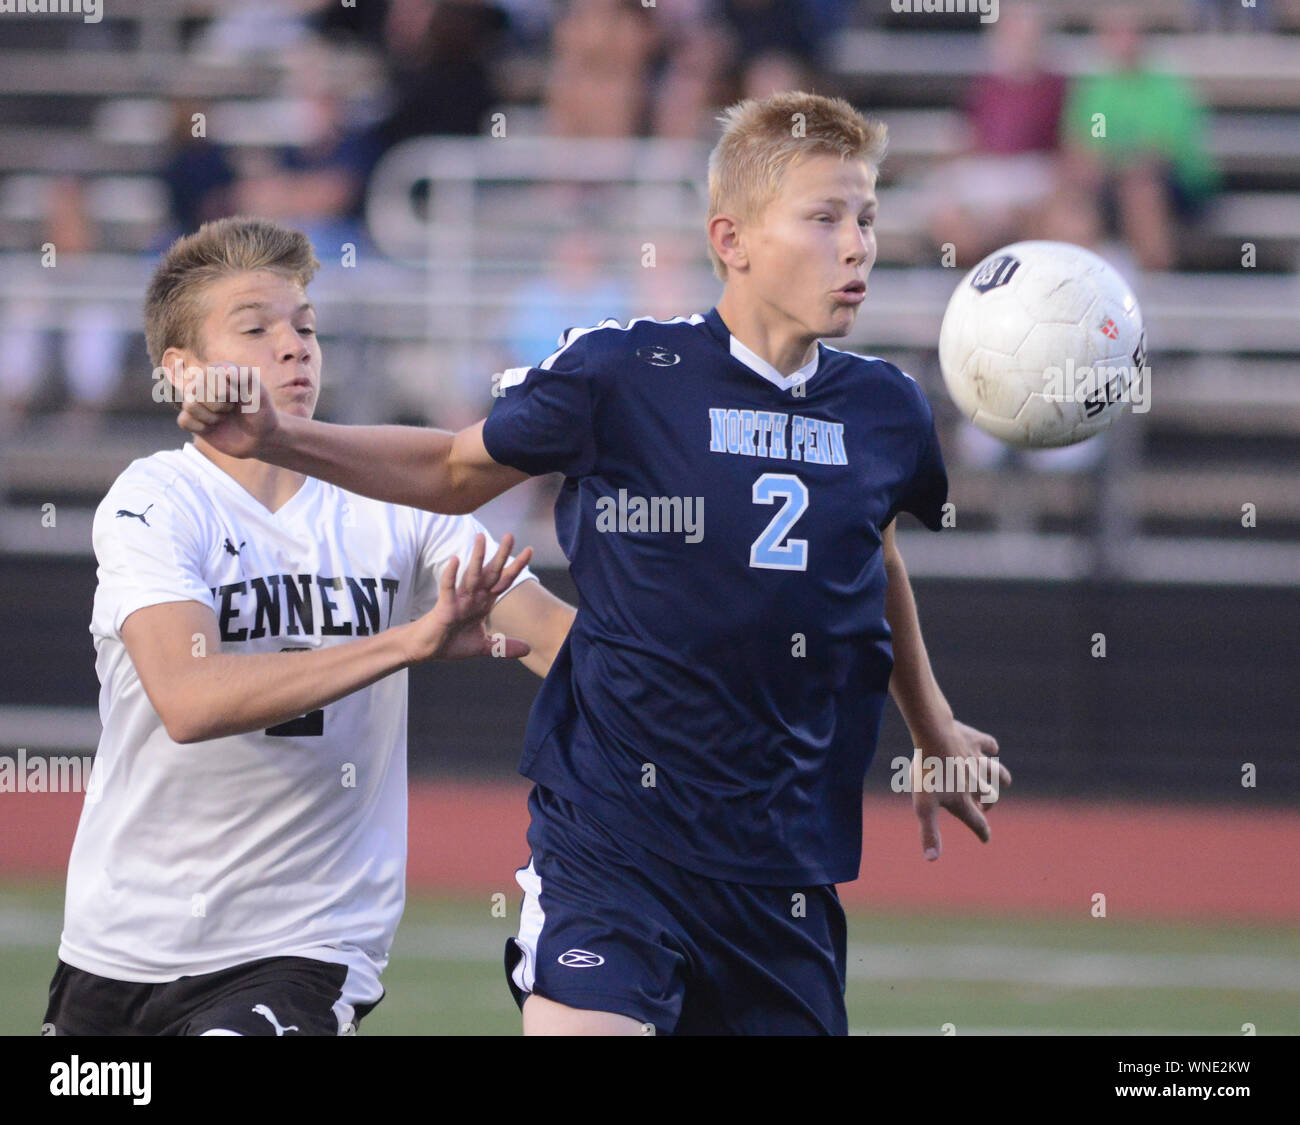 William Tennent's Max Schulze (2) chases after a loose ball with North Penn's Josh Jones (2) in the first half Tuesday, September 12, 2017 at William Stock Photo